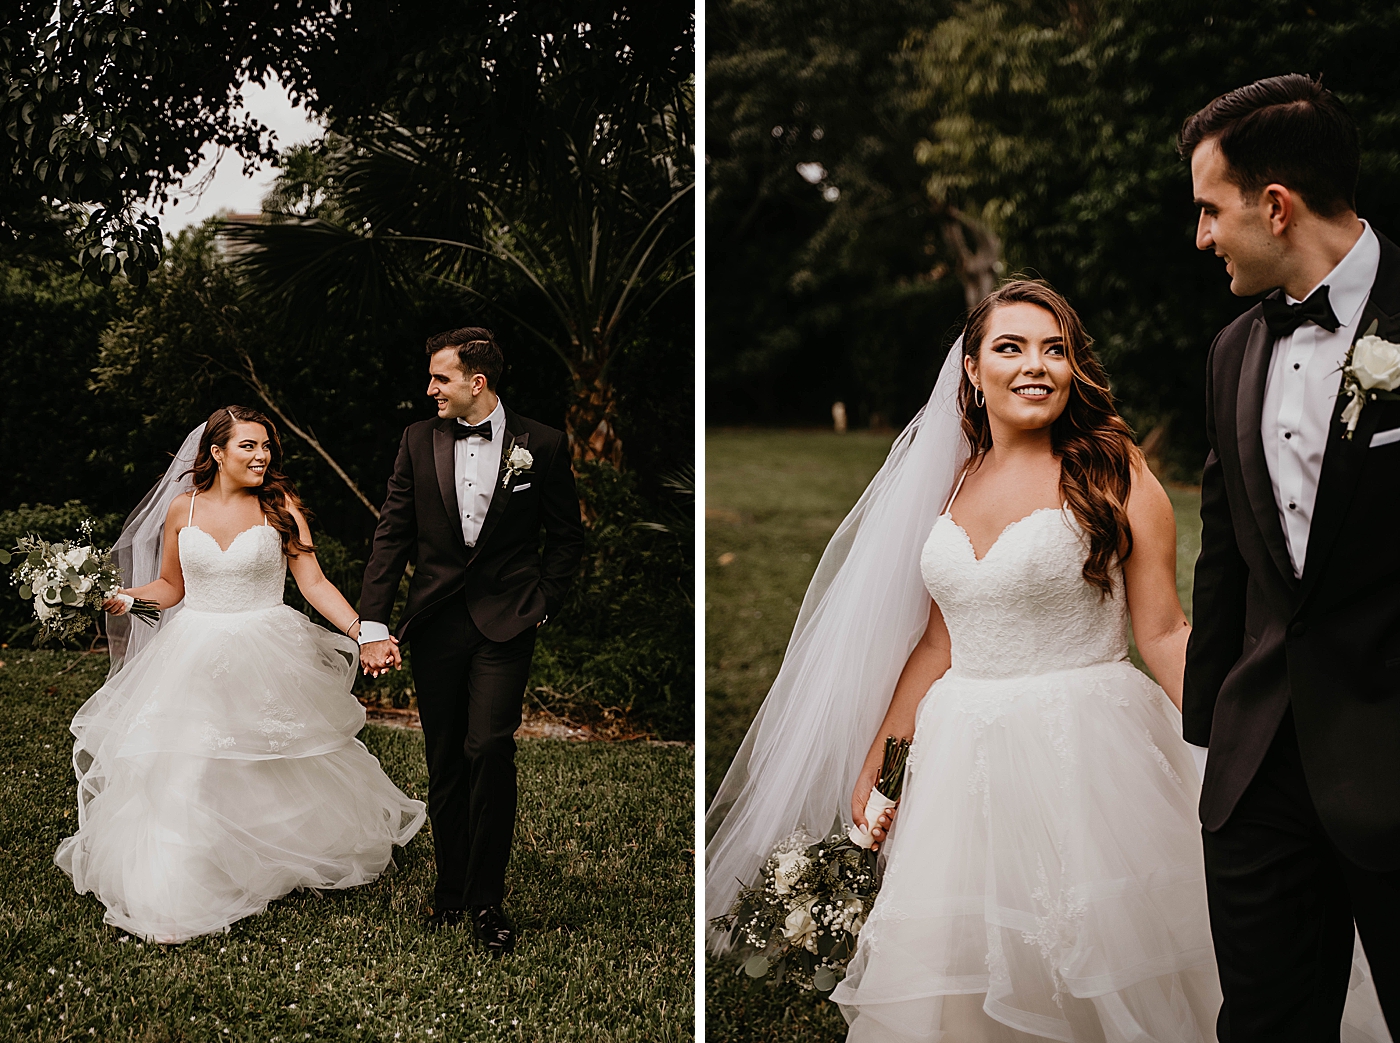 Bride and Groom walking through greenery Intimate South Florida Wedding Photography captured by Wedding Photographer Krystal Capone Photography